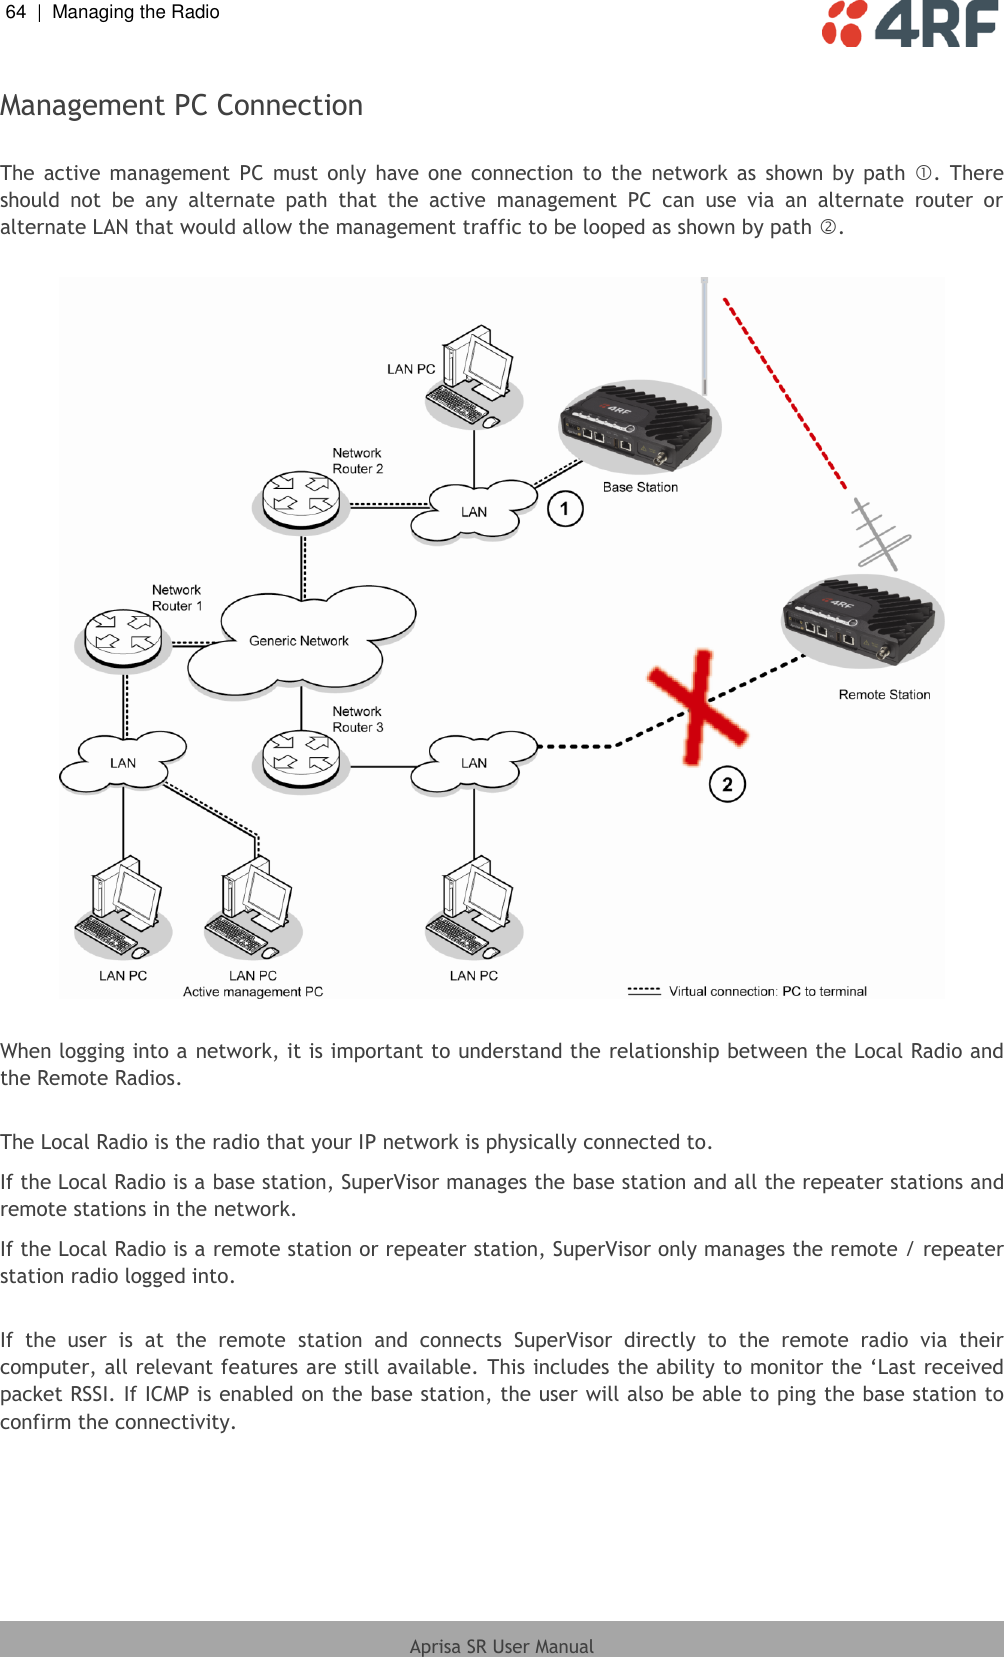 64  |  Managing the Radio   Aprisa SR User Manual  Management PC Connection  The  active  management  PC  must  only  have  one connection  to  the  network  as  shown  by  path  .  There should  not  be  any  alternate  path  that  the  active  management  PC  can  use  via  an  alternate  router  or alternate LAN that would allow the management traffic to be looped as shown by path .    When logging into a network, it is important to understand the relationship between the Local Radio and the Remote Radios.  The Local Radio is the radio that your IP network is physically connected to. If the Local Radio is a base station, SuperVisor manages the base station and all the repeater stations and remote stations in the network. If the Local Radio is a remote station or repeater station, SuperVisor only manages the remote / repeater station radio logged into.  If  the  user  is  at  the  remote  station  and  connects  SuperVisor  directly  to  the  remote  radio  via  their computer, all relevant features are still available. This includes the ability to monitor the ‘Last received packet RSSI. If ICMP is enabled on the base station, the user will also be able to ping the base station to confirm the connectivity.  